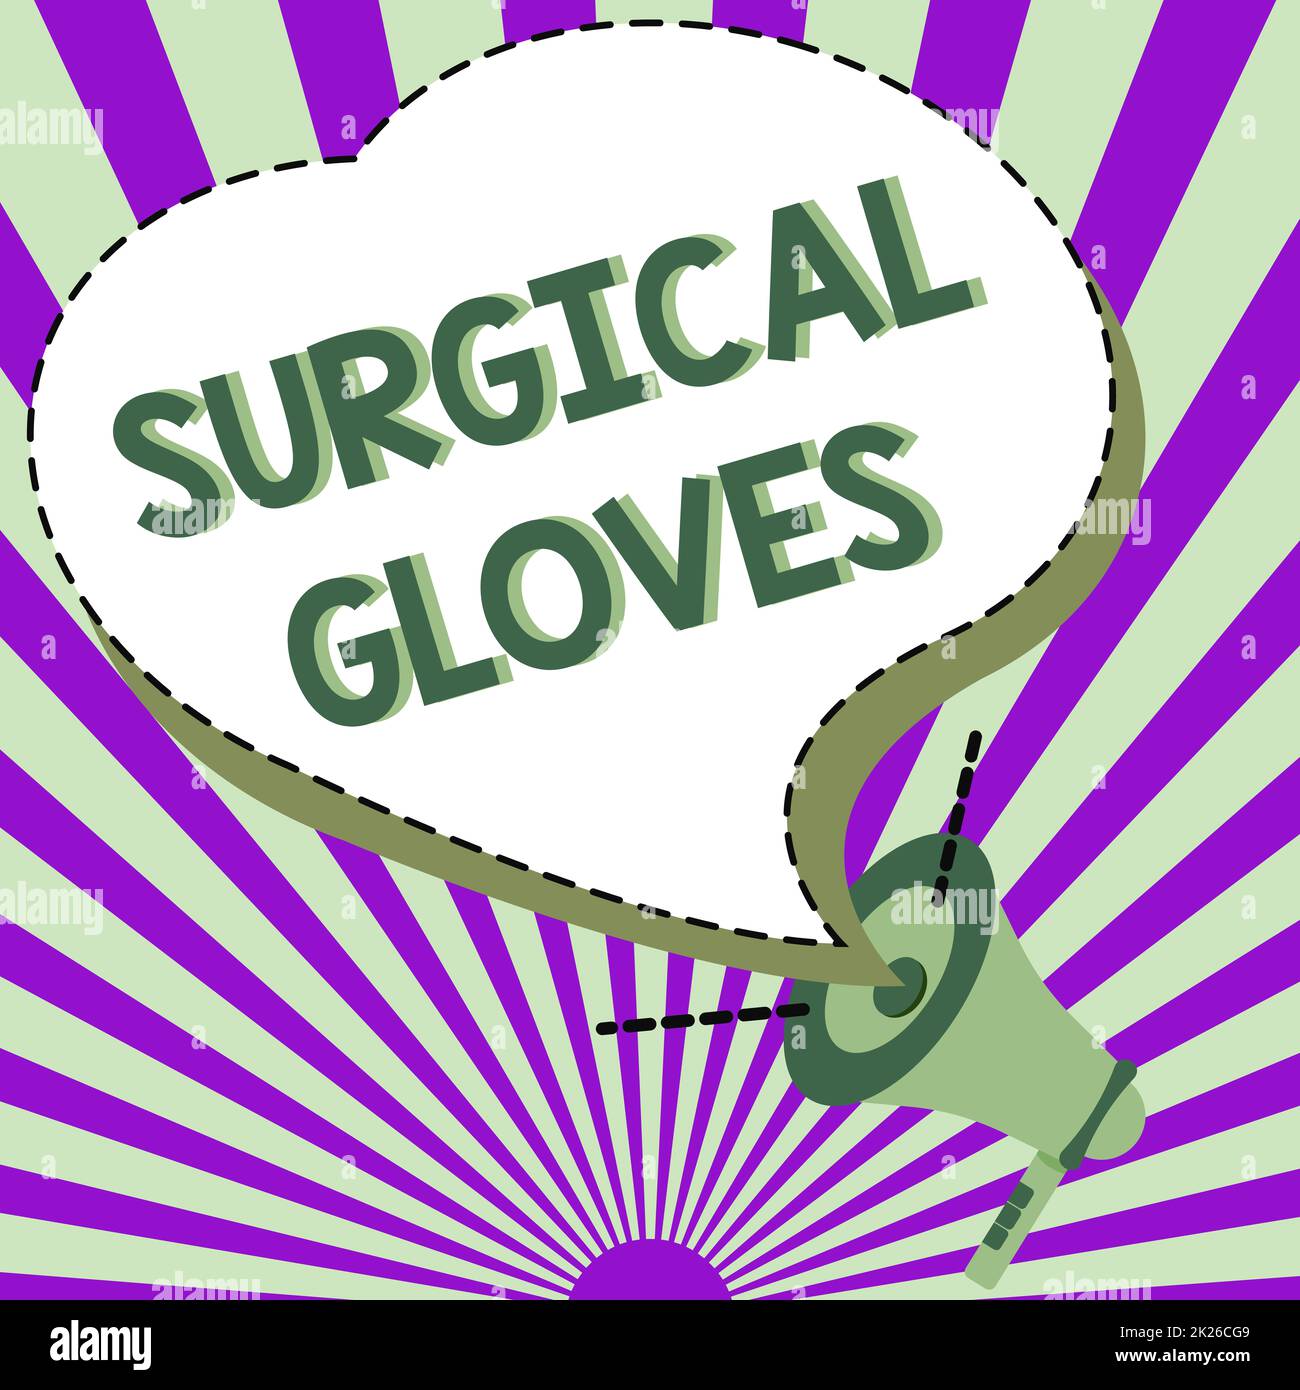 Conceptual display Surgical Gloves. Concept meaning to protect from the exposure to infectious materials Illustration Of A Loud Megaphone Speaker Making New Announcements Stock Photo